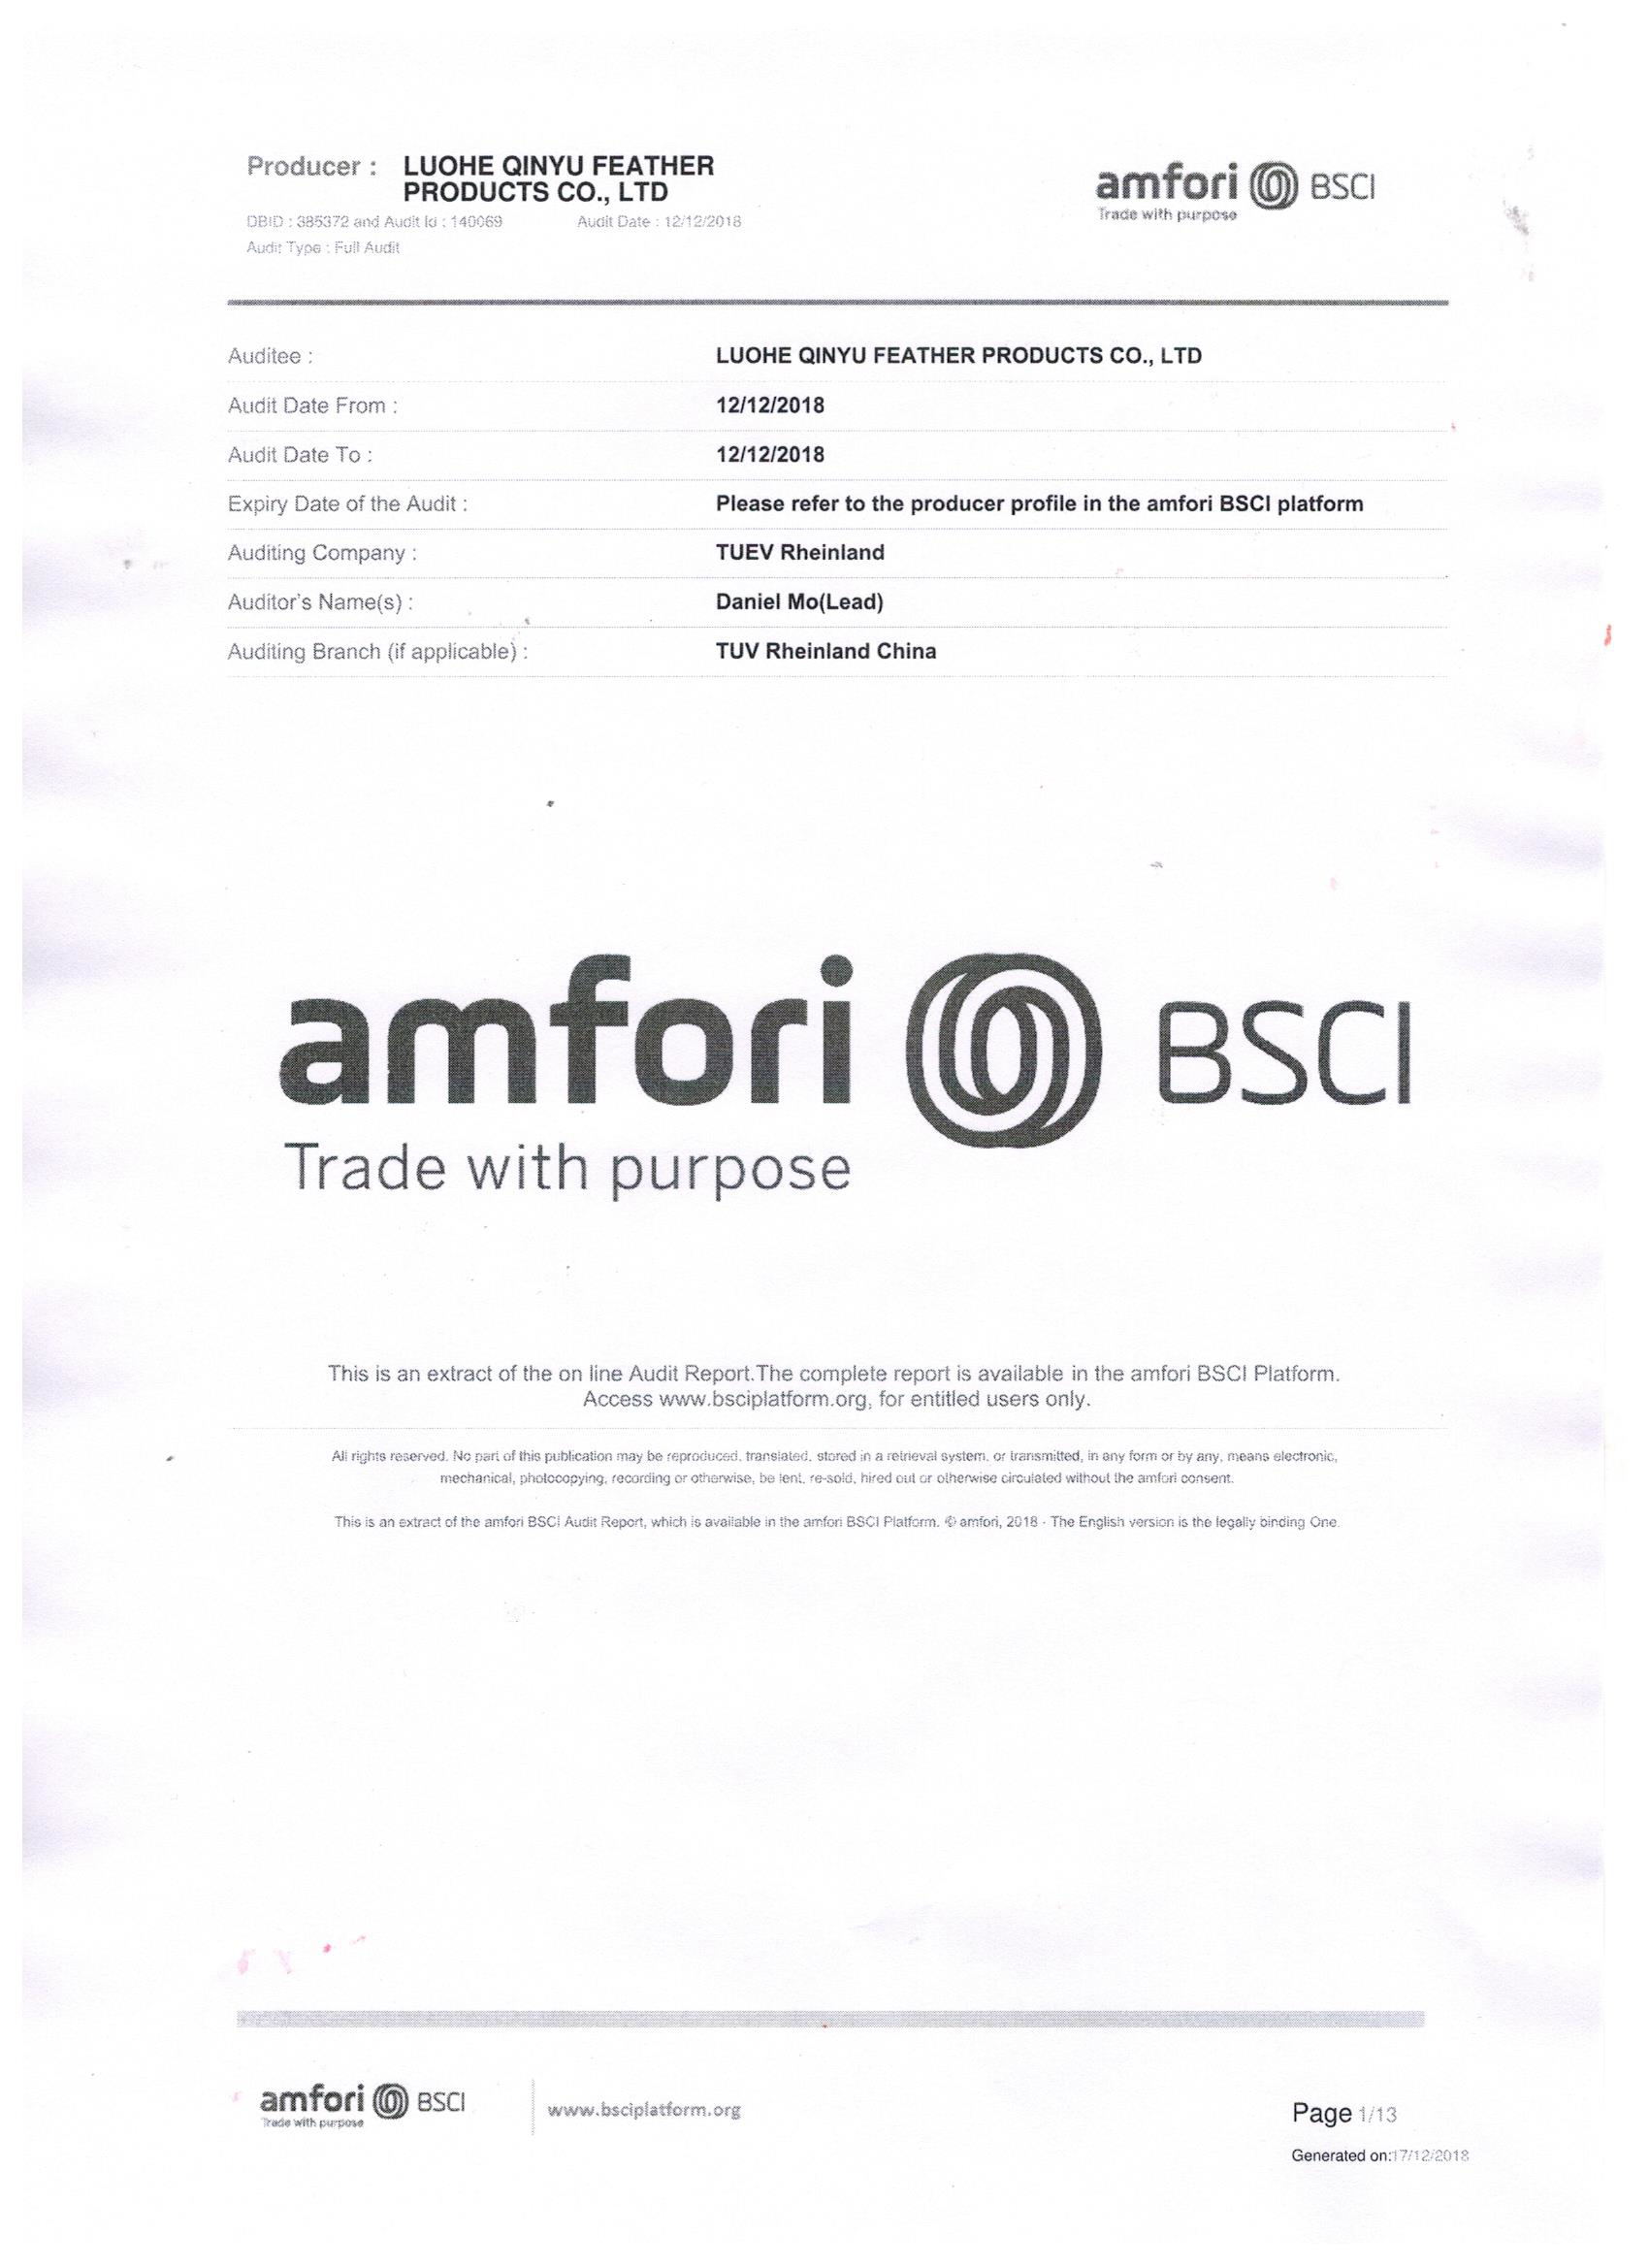 Our factory passed BSCI Audit 